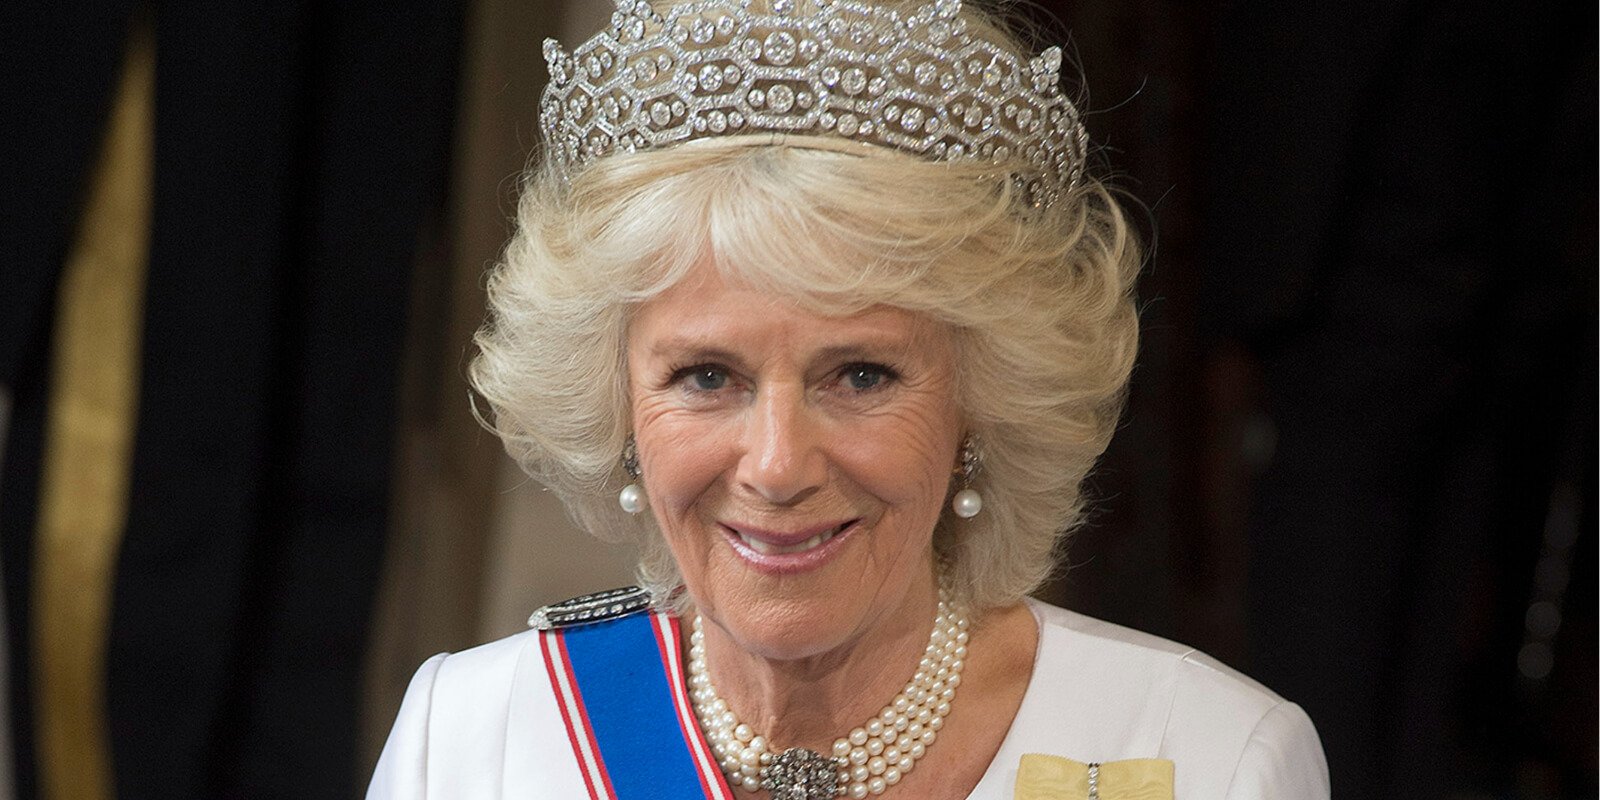 Camilla Parker Bowles dropped consort from her coronation invite, is now known as Queen Camilla.